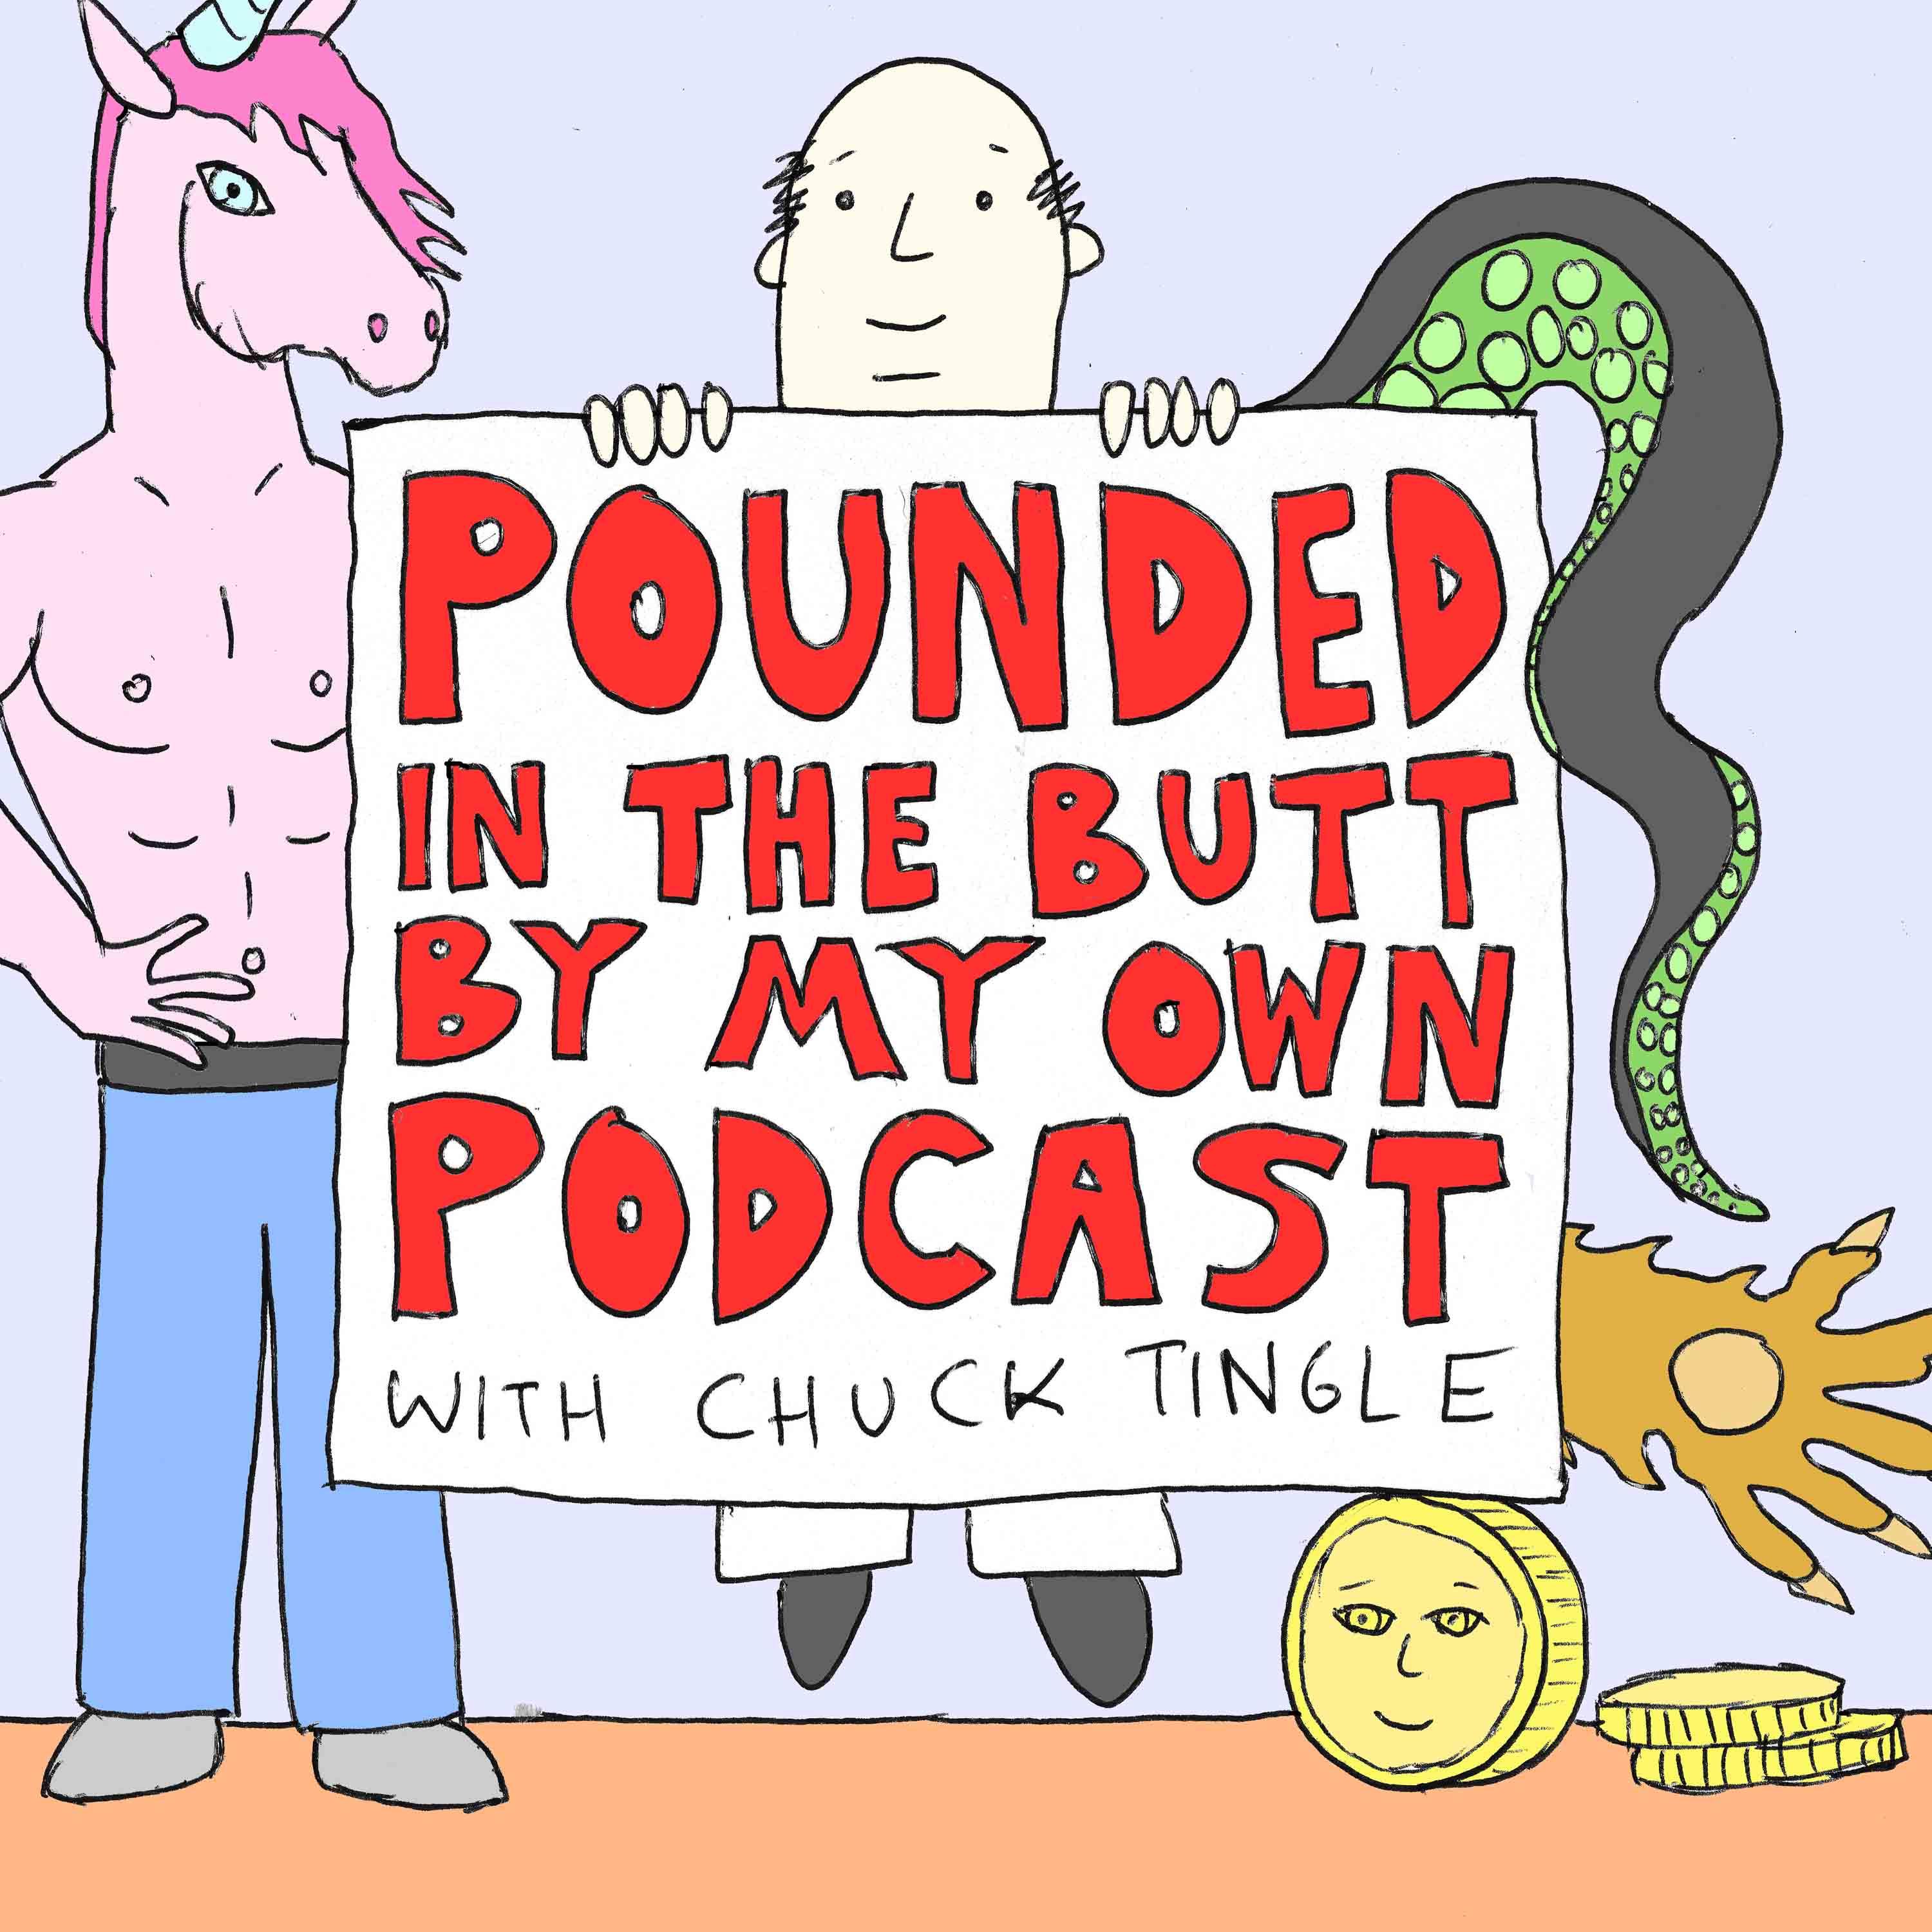 Thumbnail for "Monday Pounds Me In The Butt, read by Helen Zaltzman".